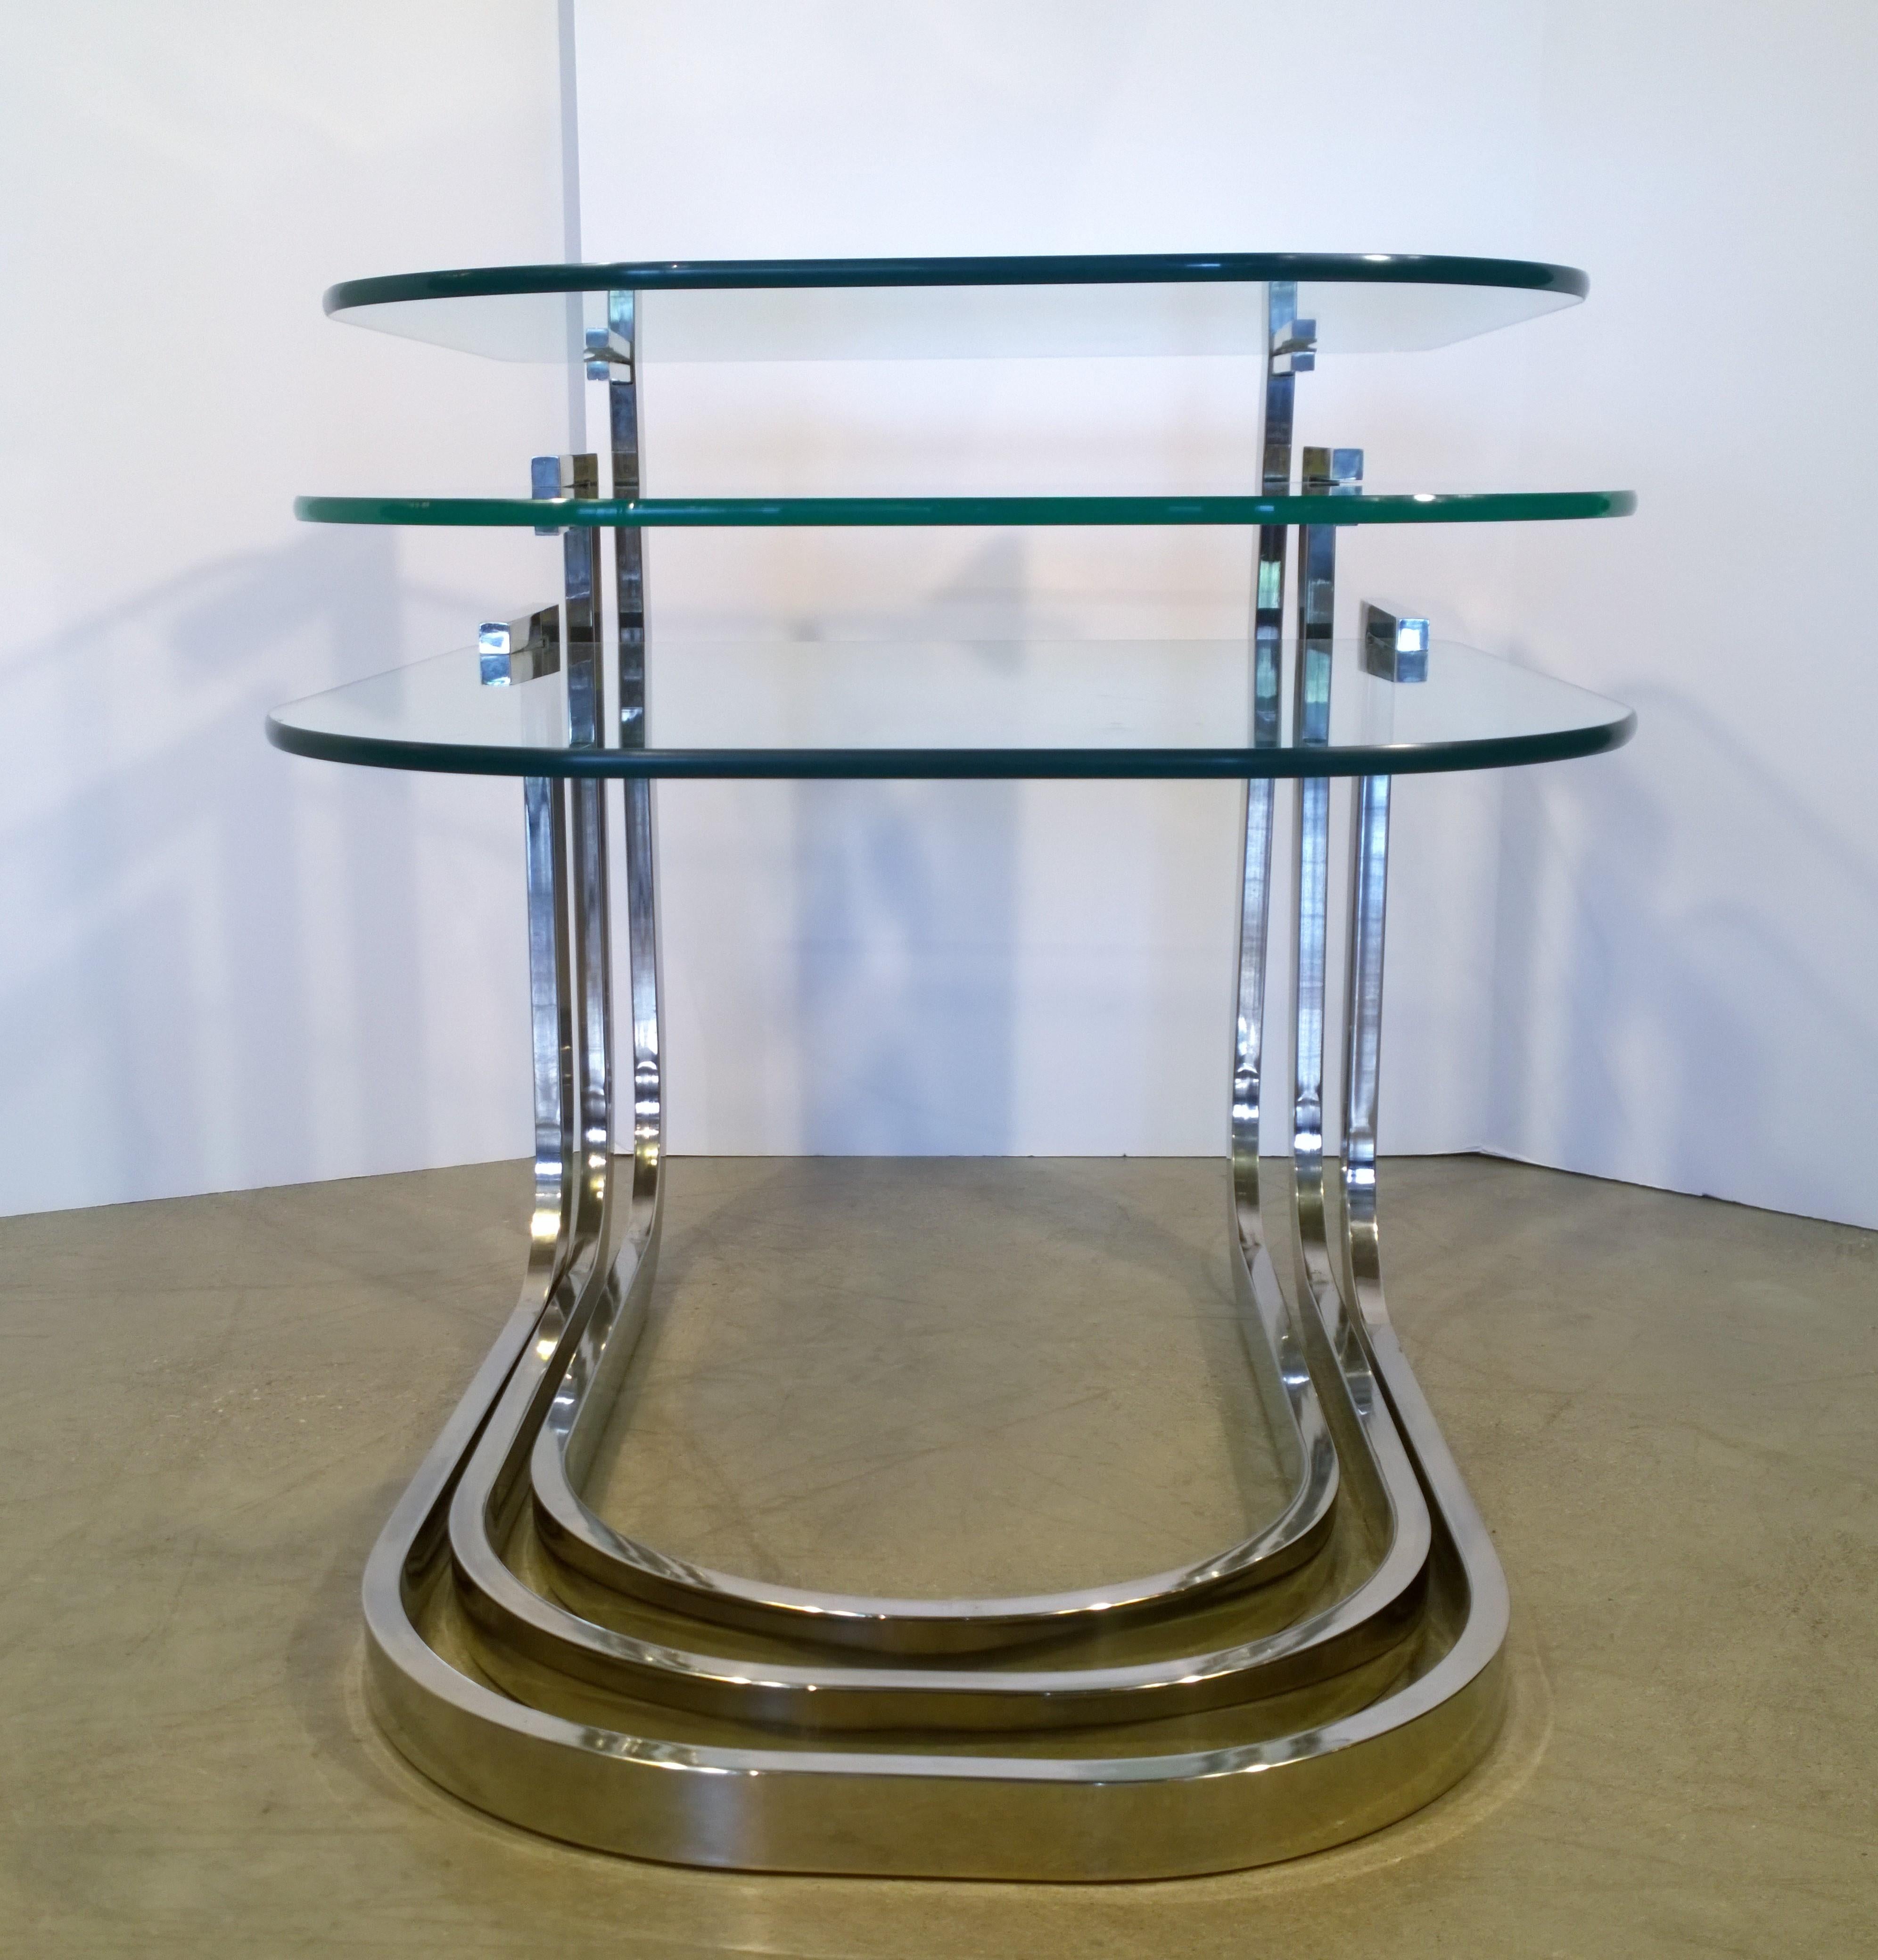 Offered is a set of three Mid-Century Modern Design Institute America glass and chrome stacking tables. This set of three chrome and glass stacking tables are a true example of DIA's Classic modernist vision. The horseshoe shape of the chrome and